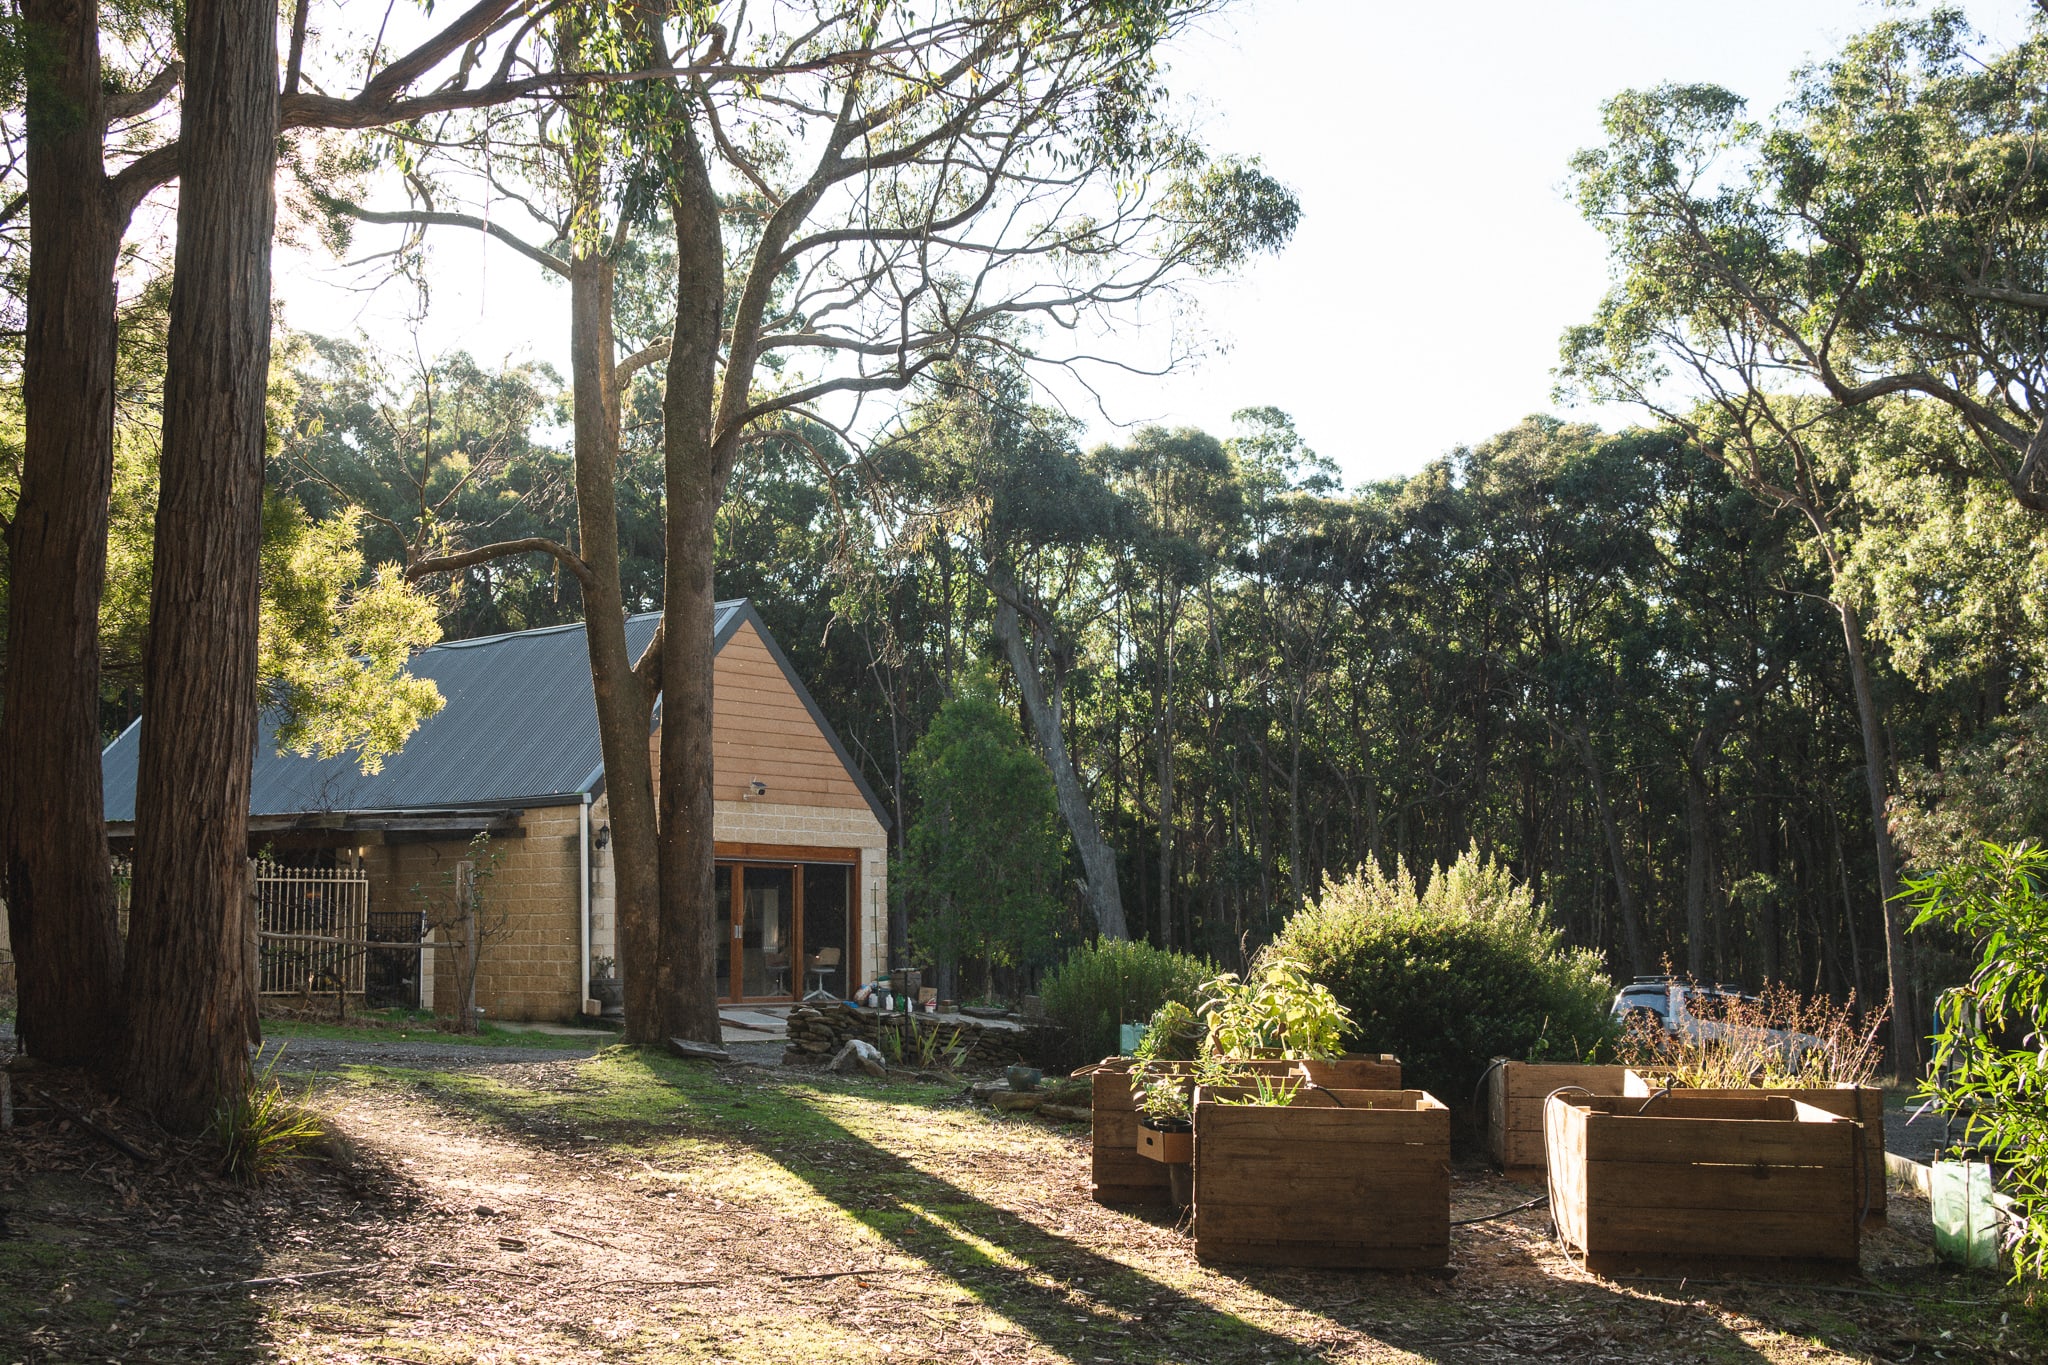 The cottage is surrounded by beautiful bushland.